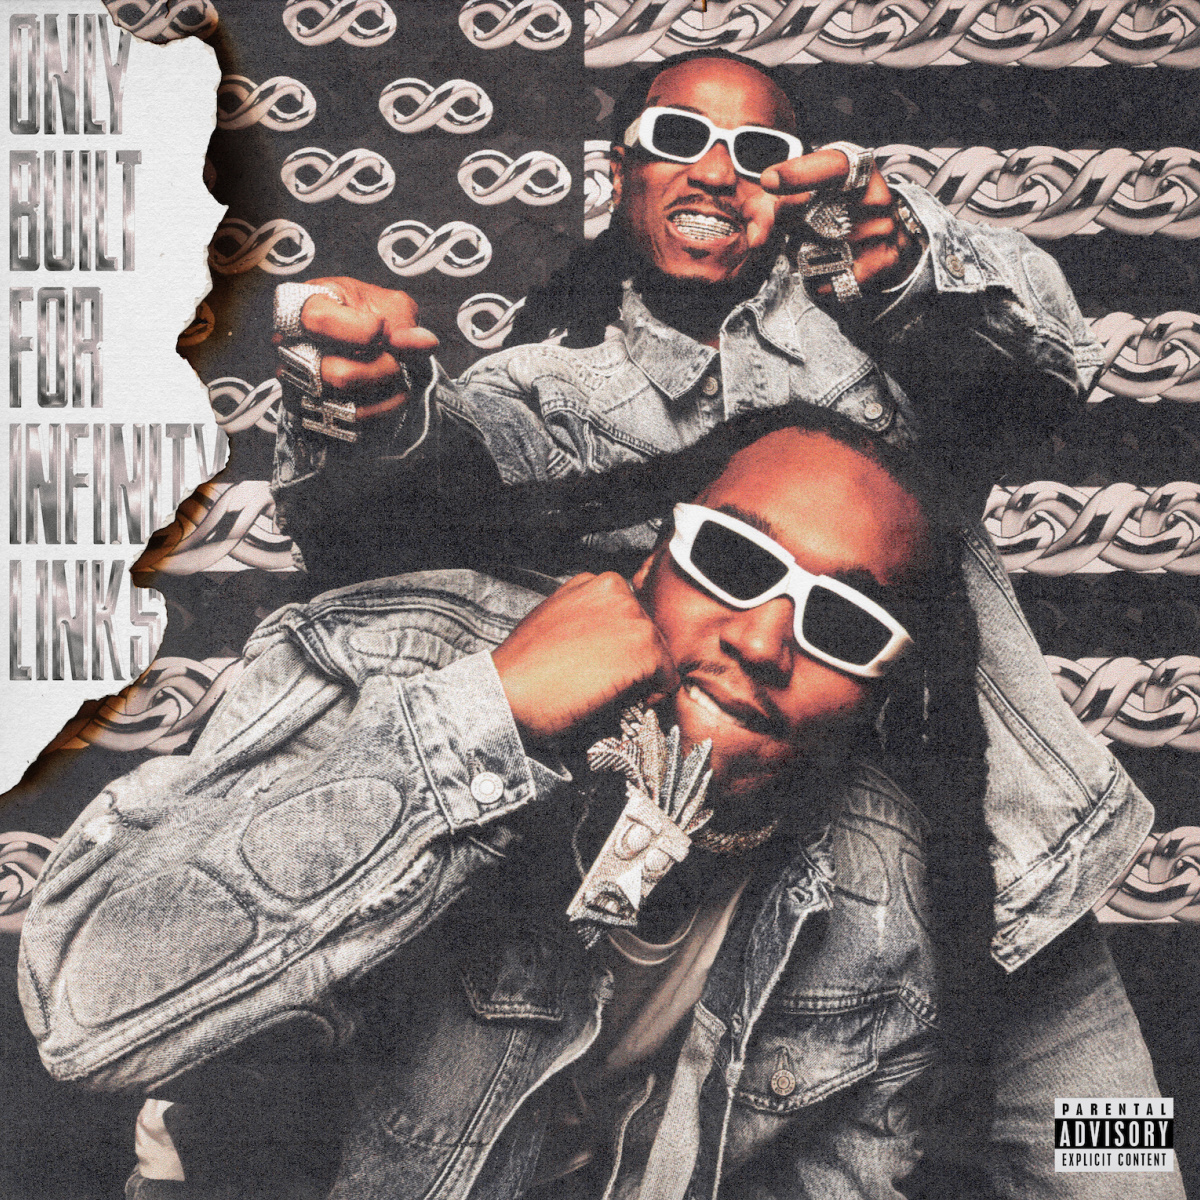 Quavo &amp; Takeoff &#x27;Only Built for Infinity Links&#x27; cover